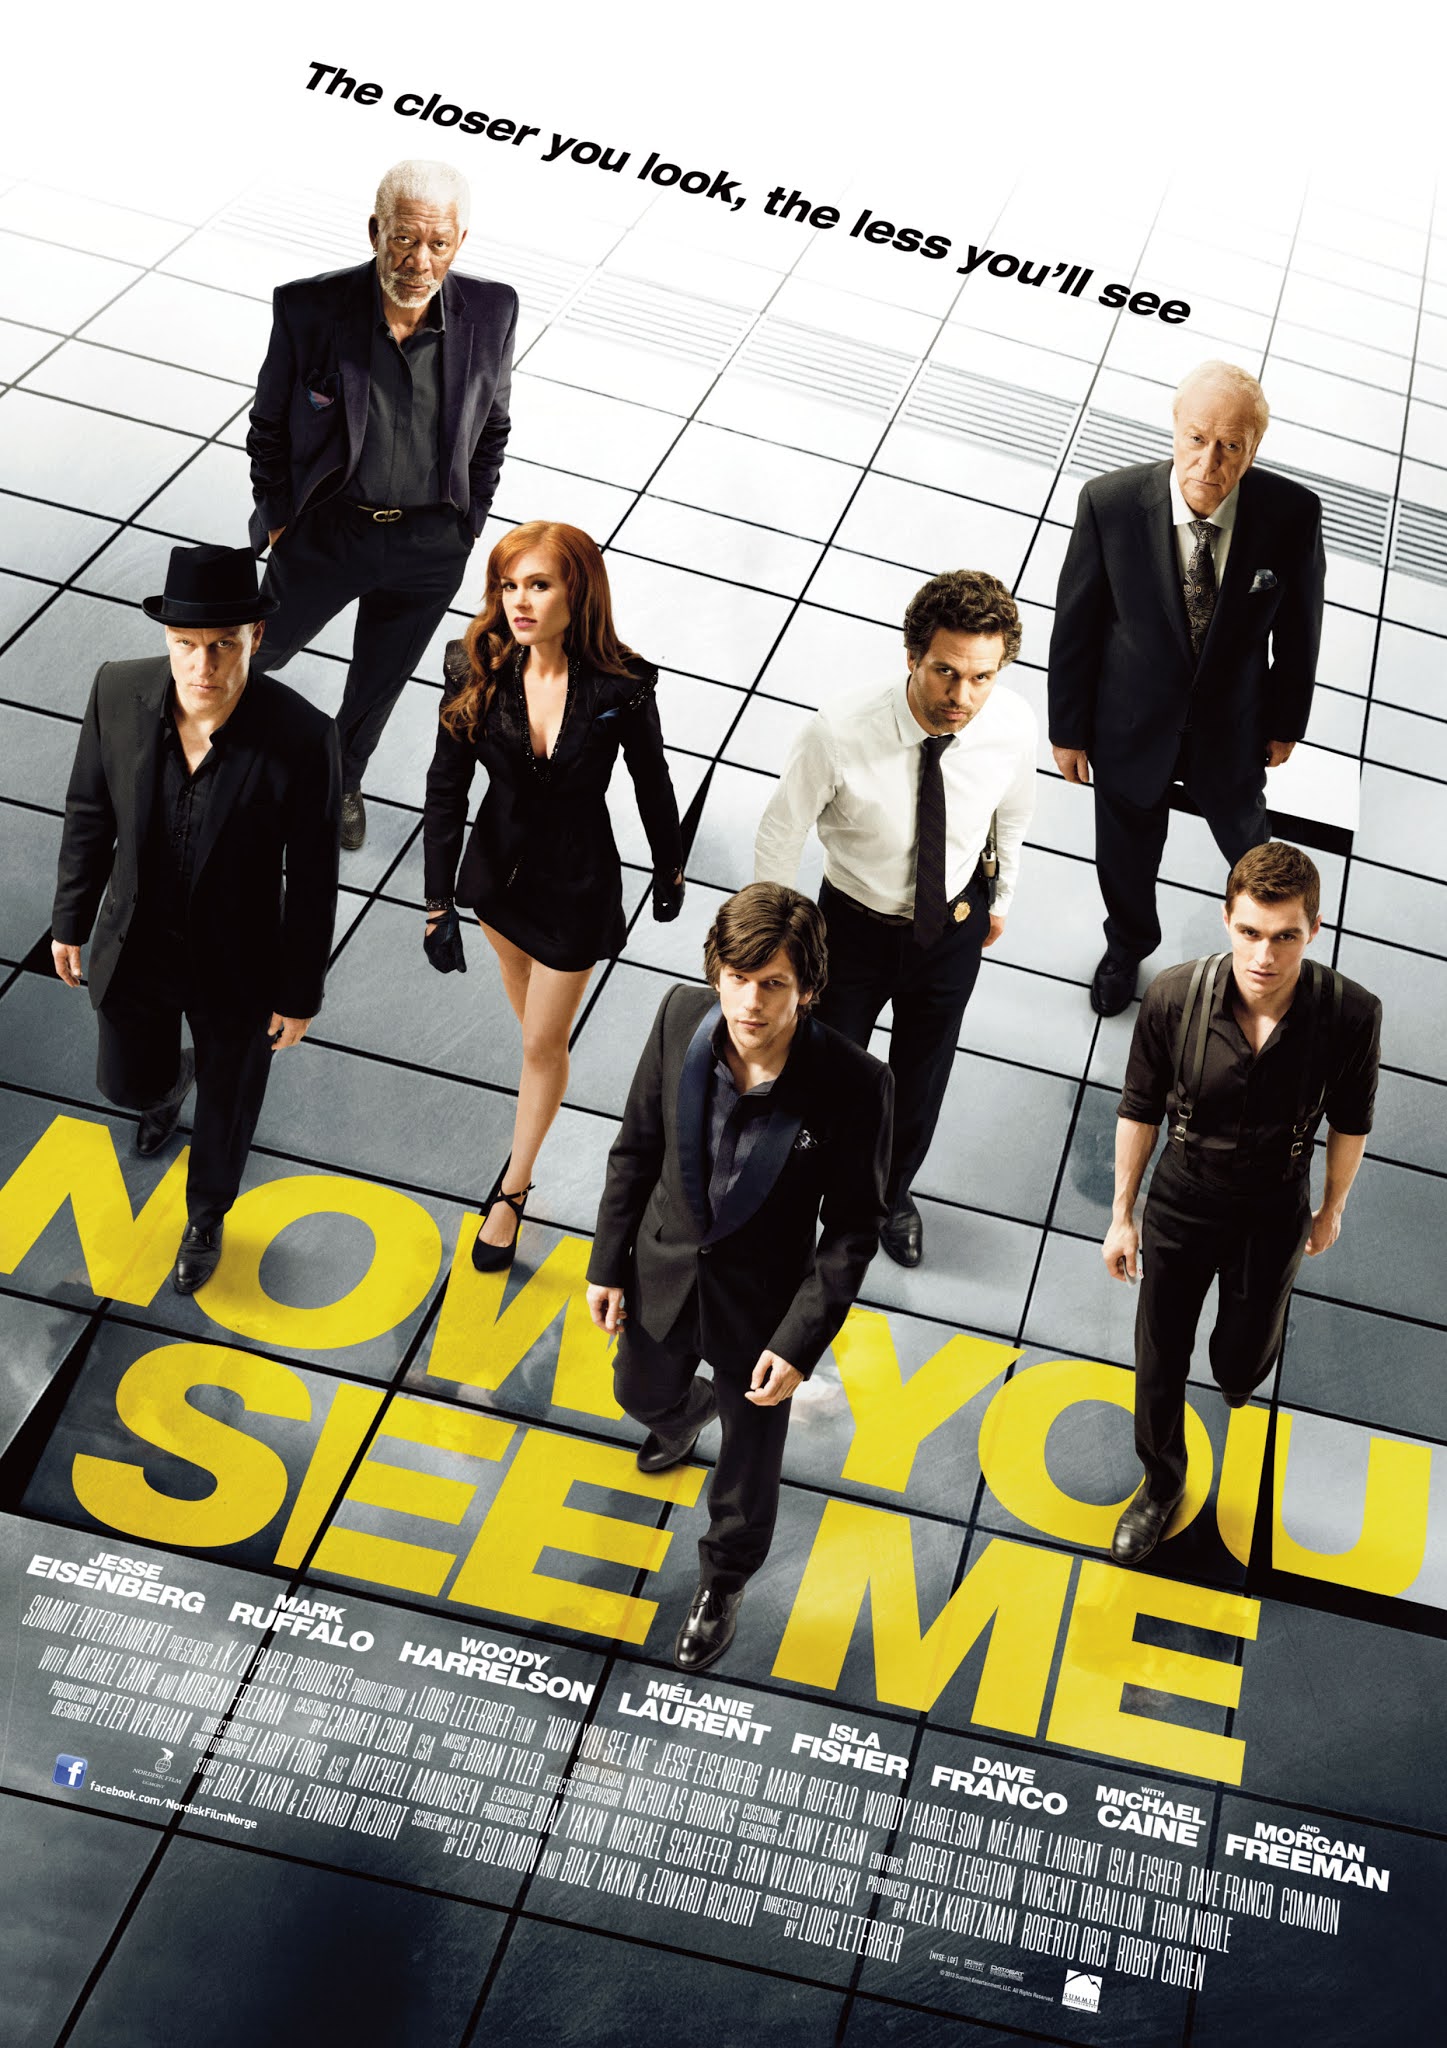 now you see me 2013